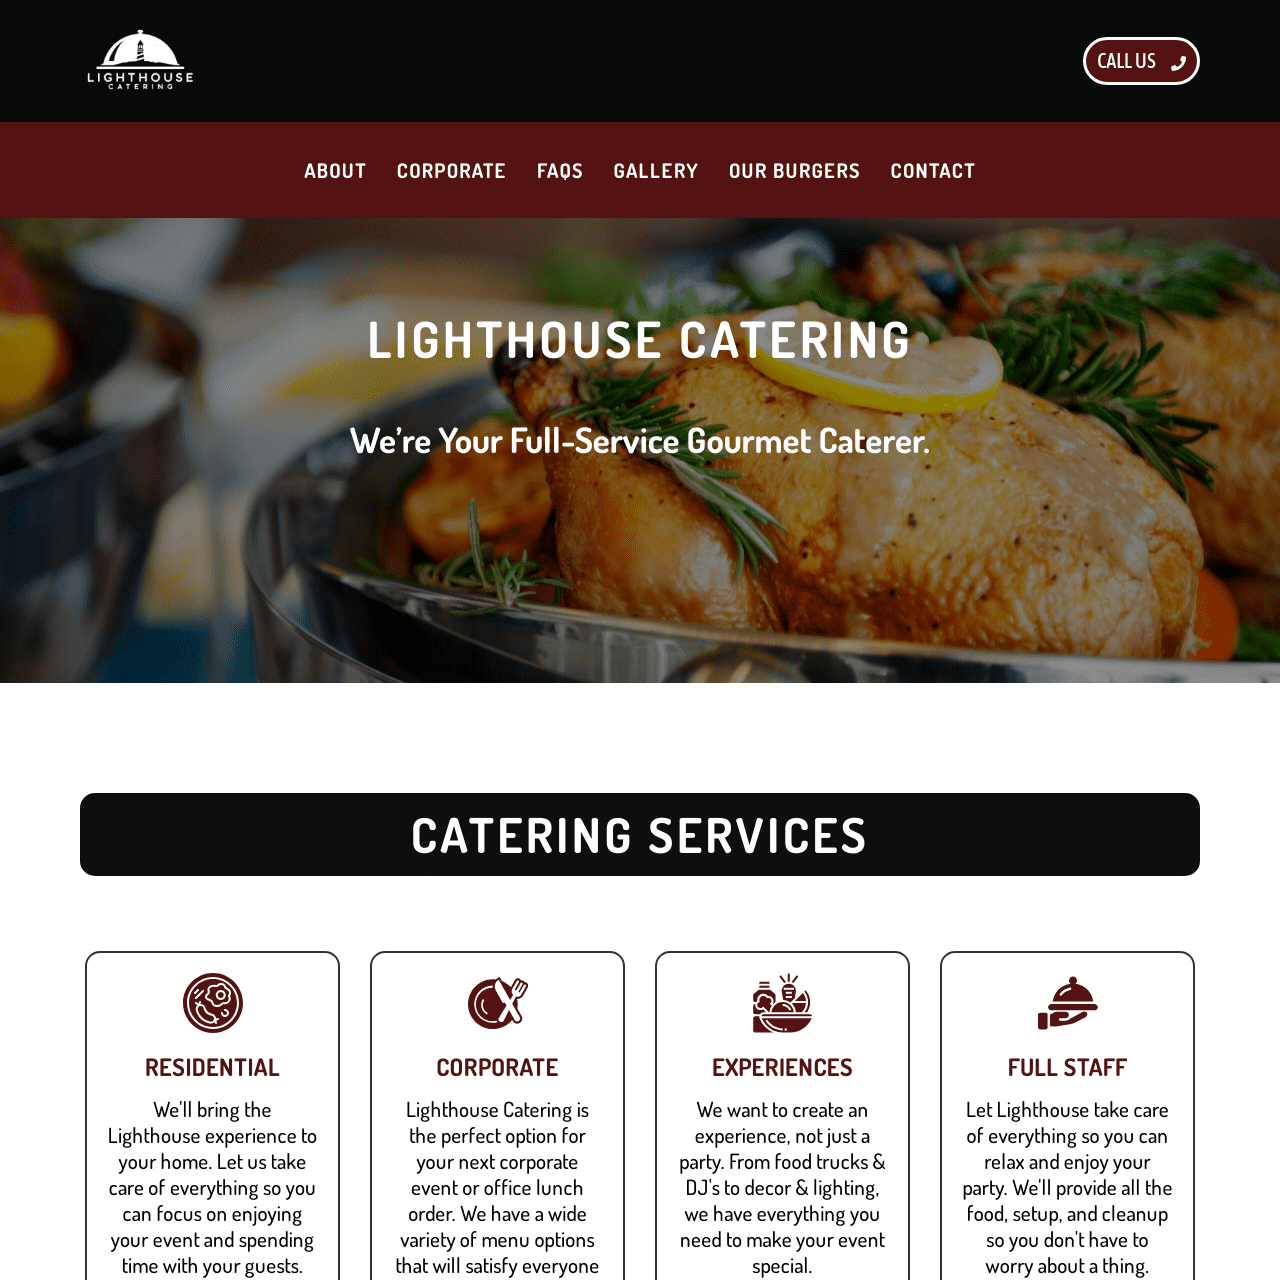 Lighthouse Catering Homepage Design